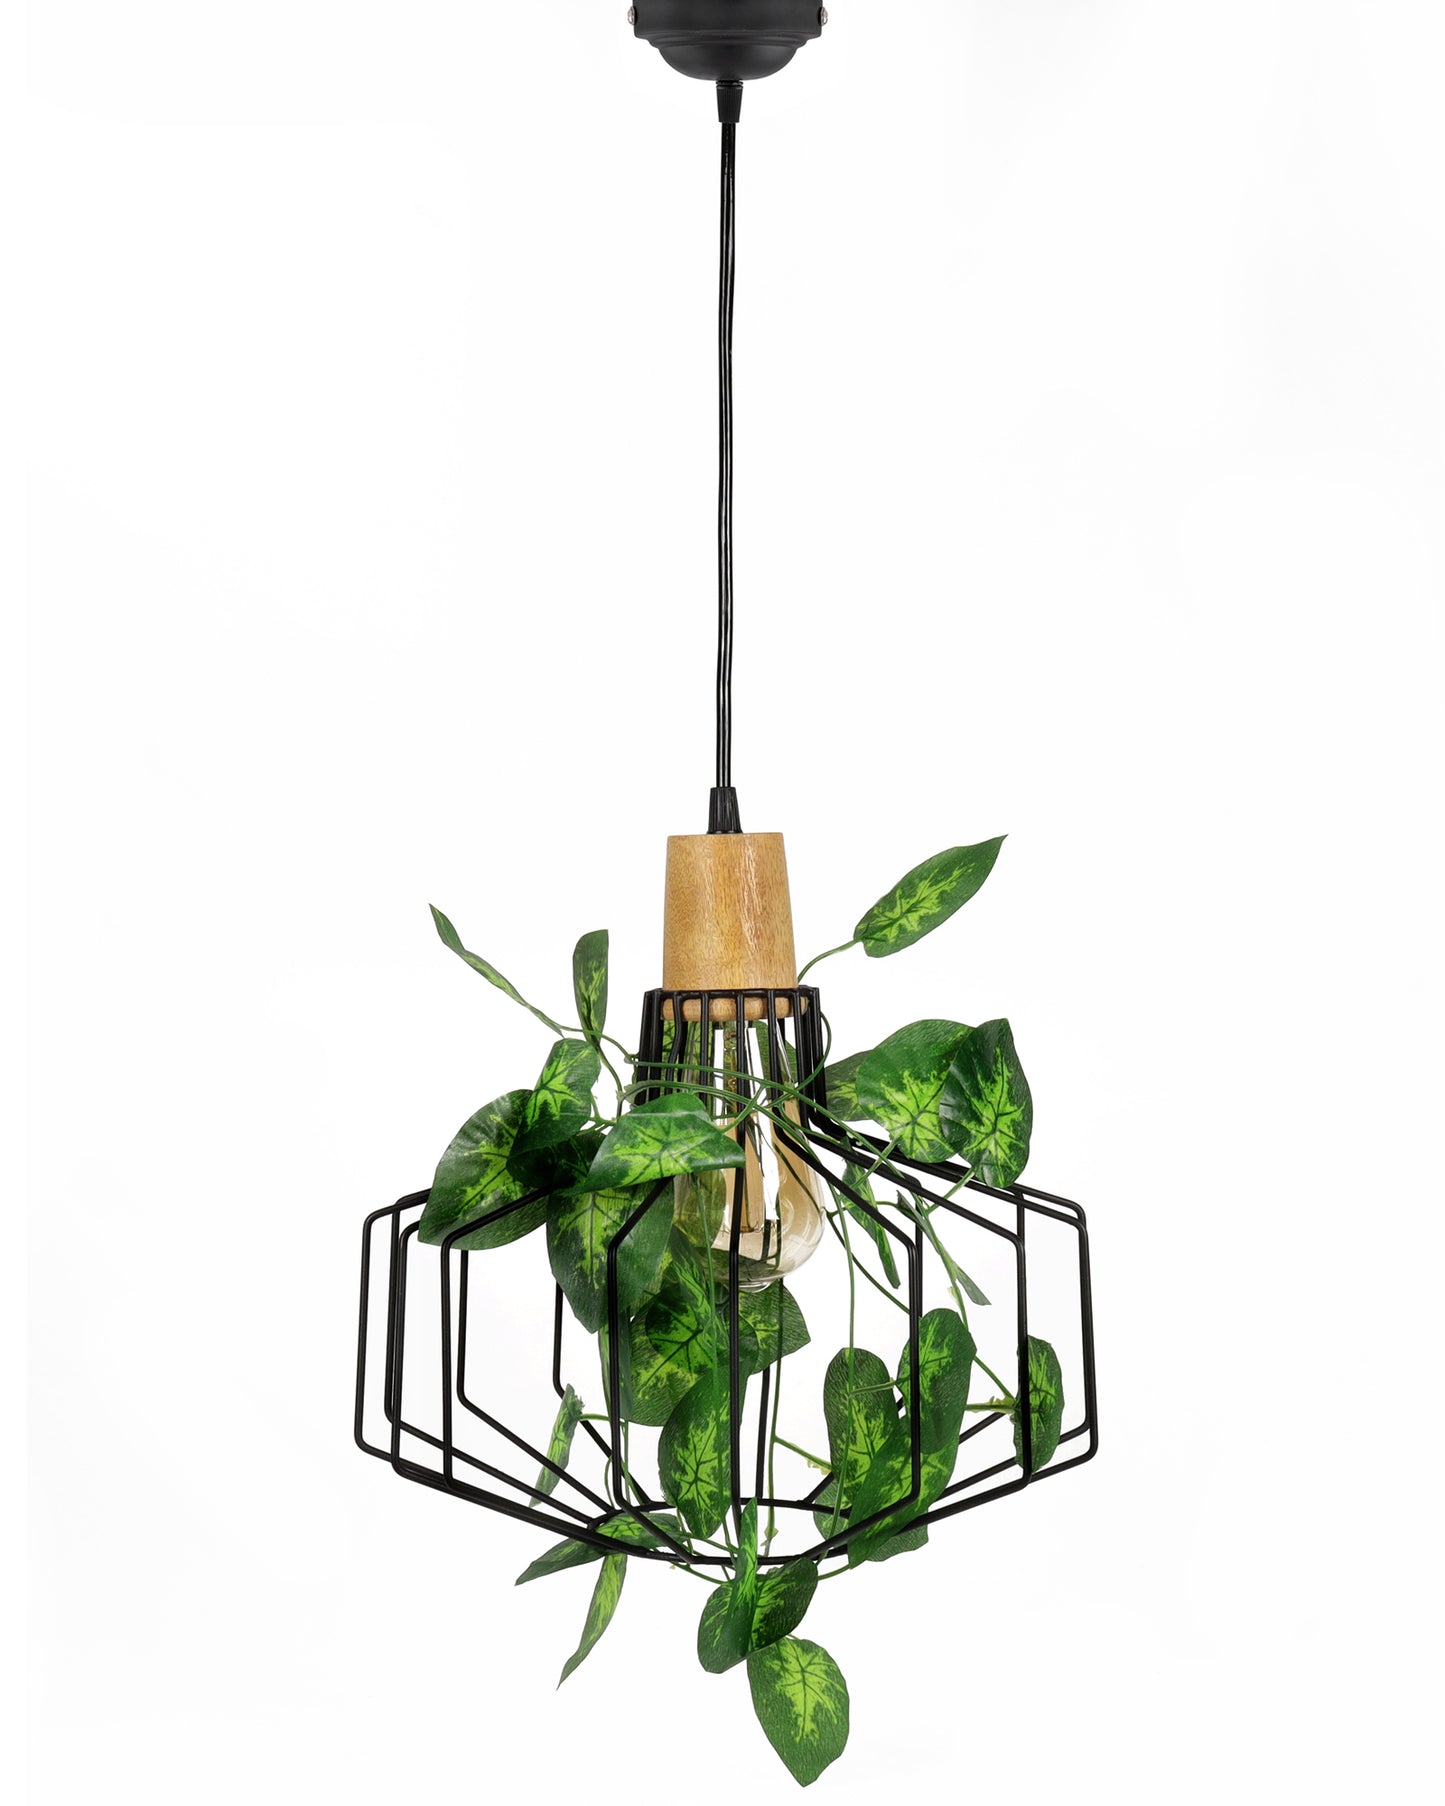 Hanging Pendant Plant Light Fixtures Creative Home Decor Living Room Dining, Ceiling light with leafy vine and filament bulb, Taper Wood Pitcher